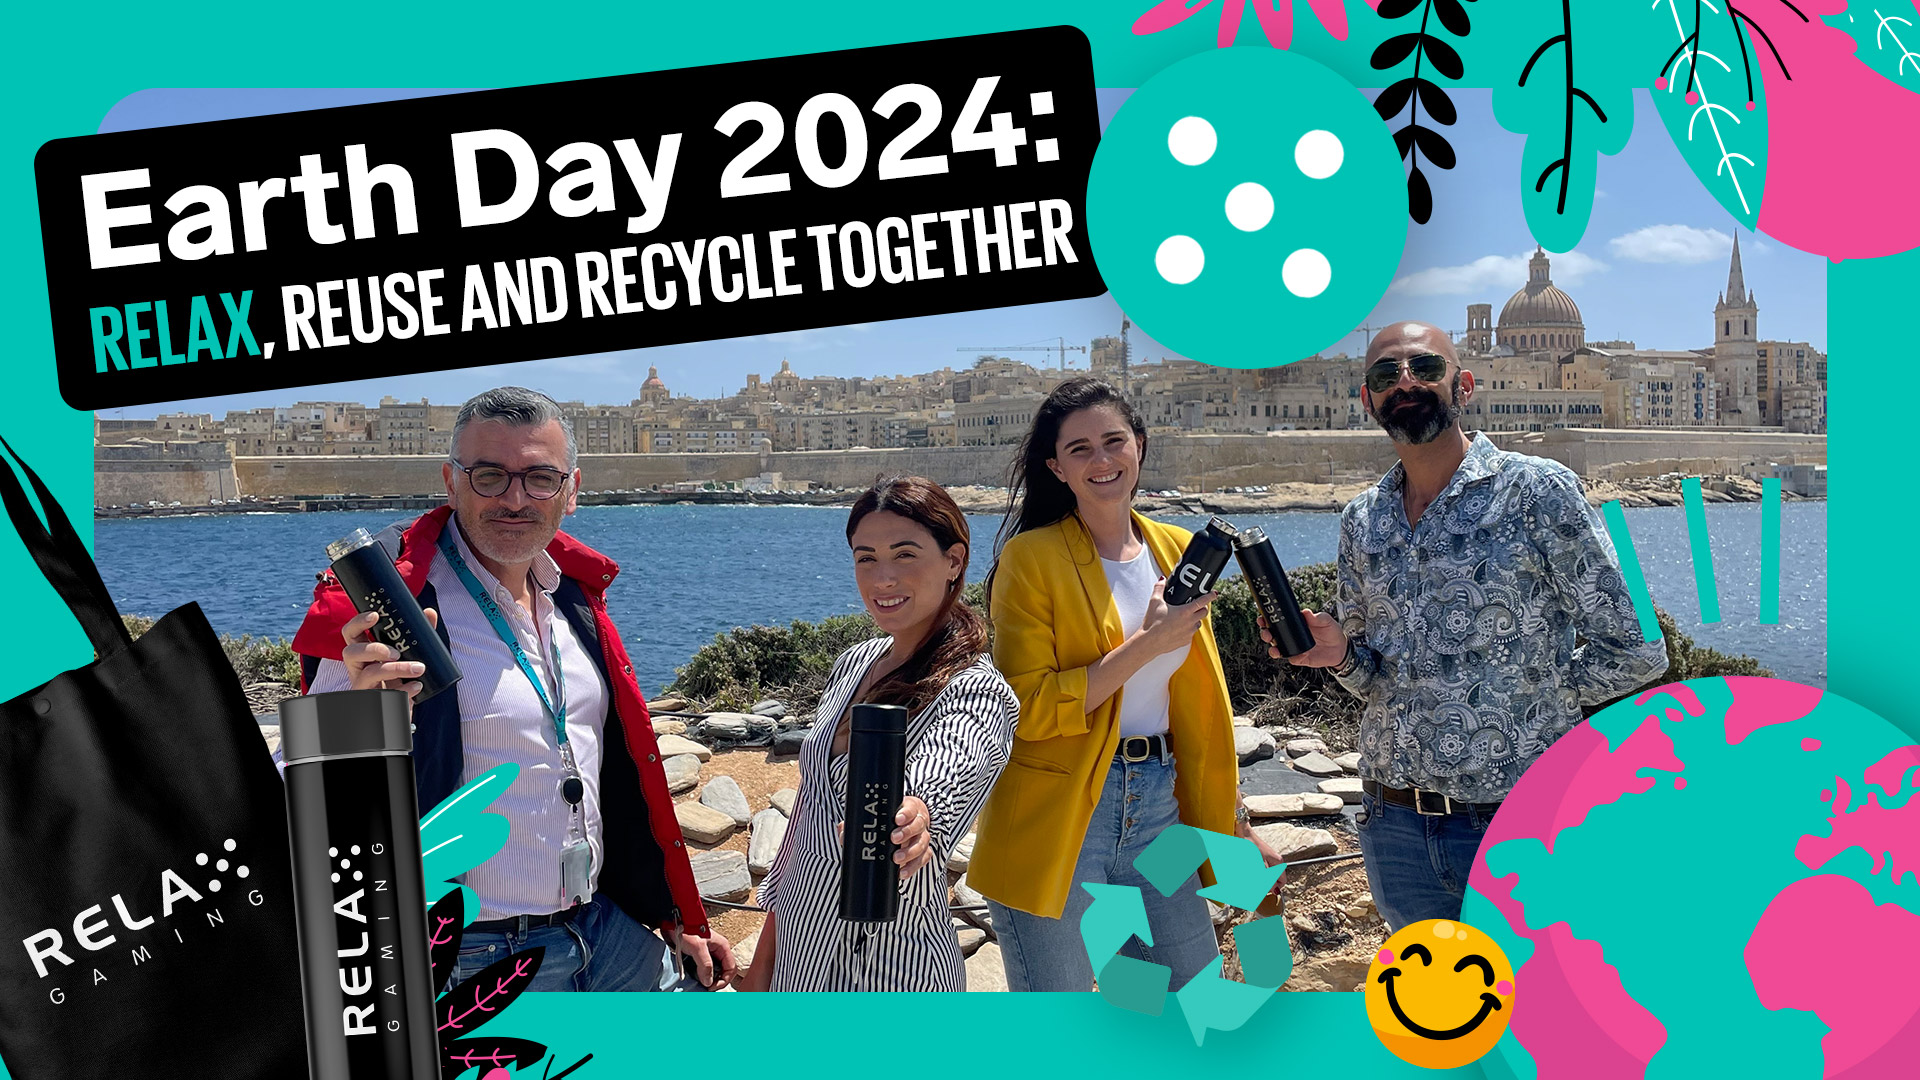 Earth Day 2024: Relax, reuse and recycle together